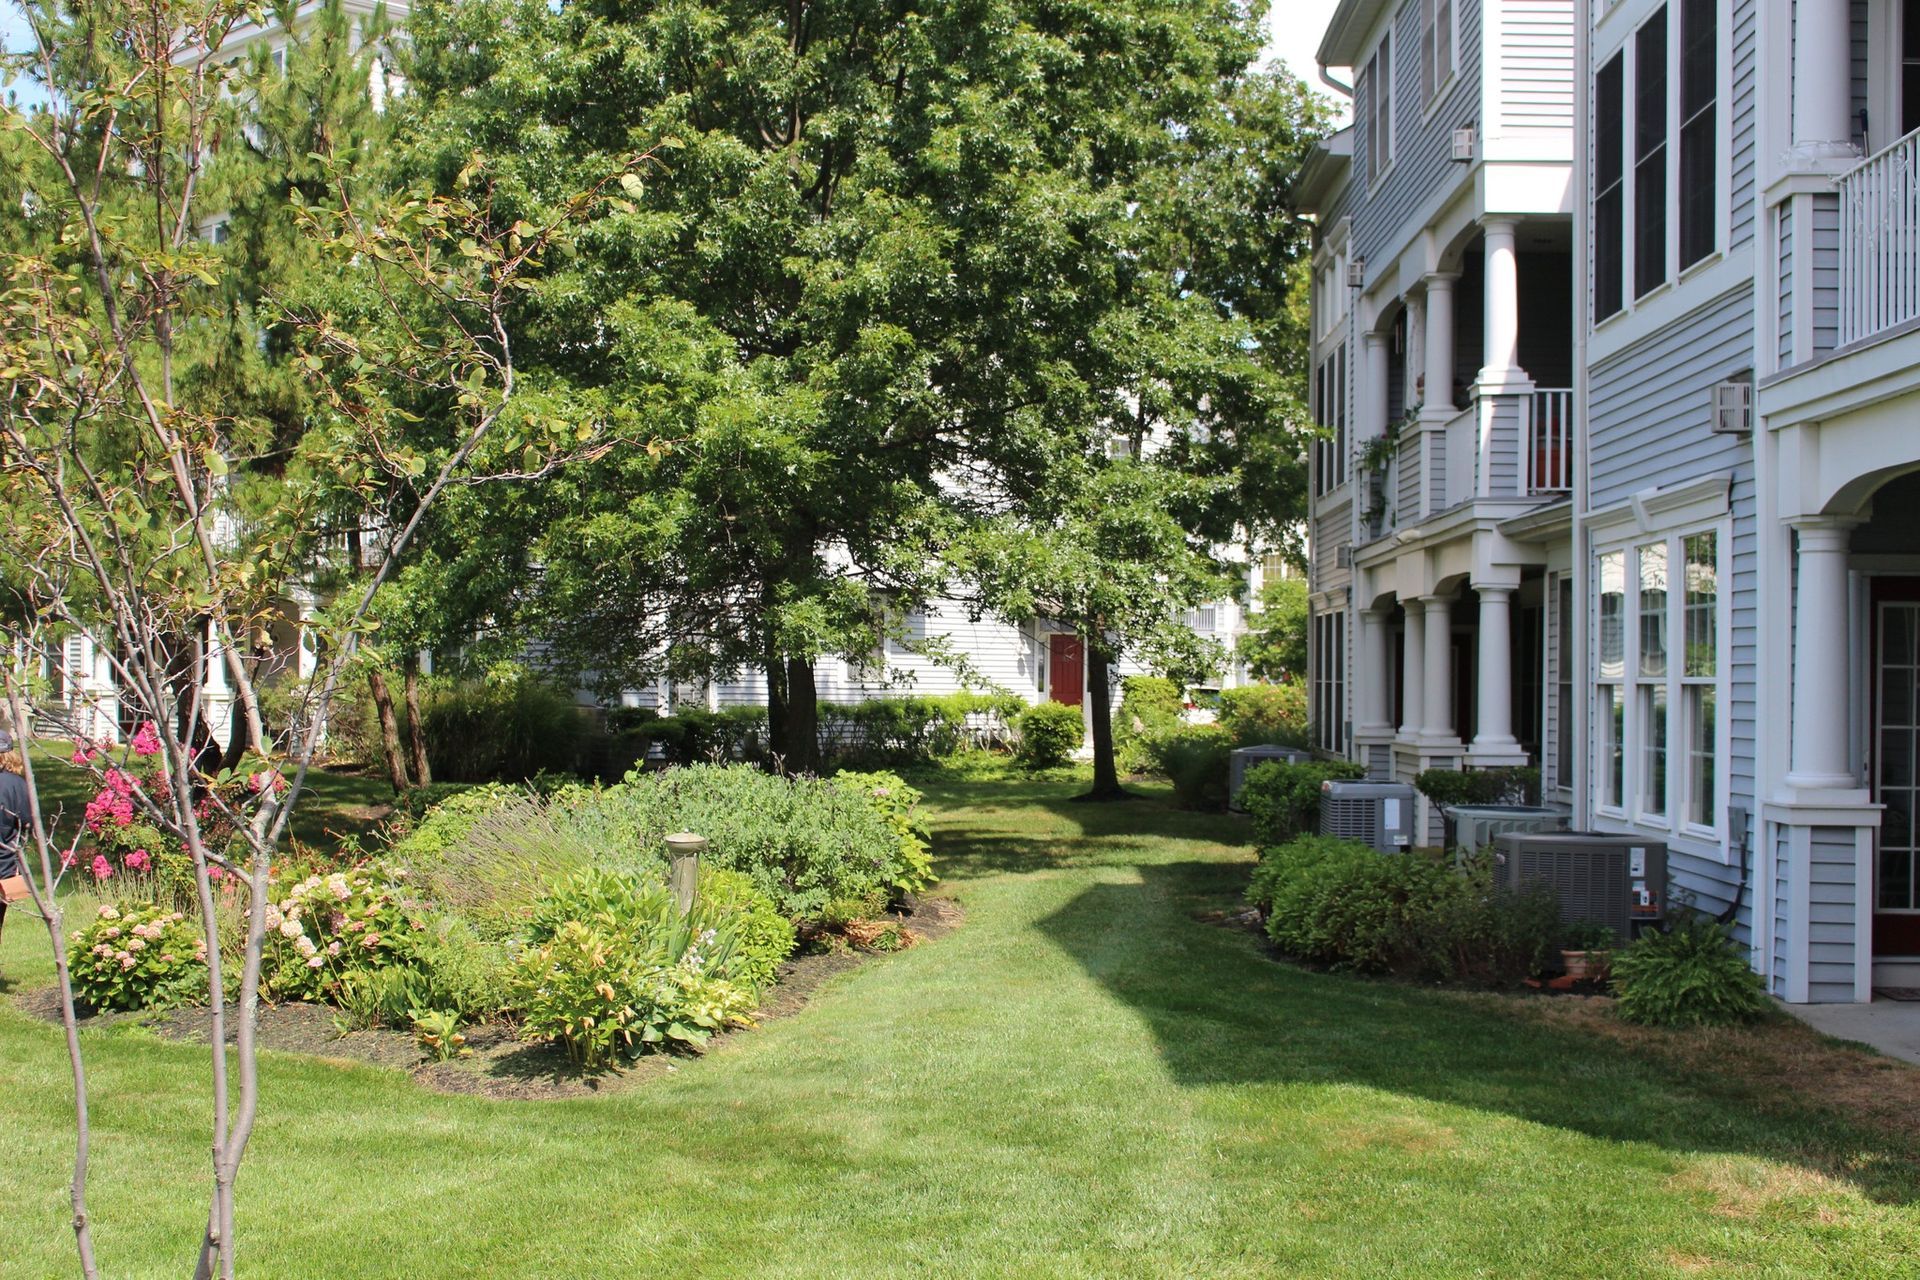 commercial lawn care and property care